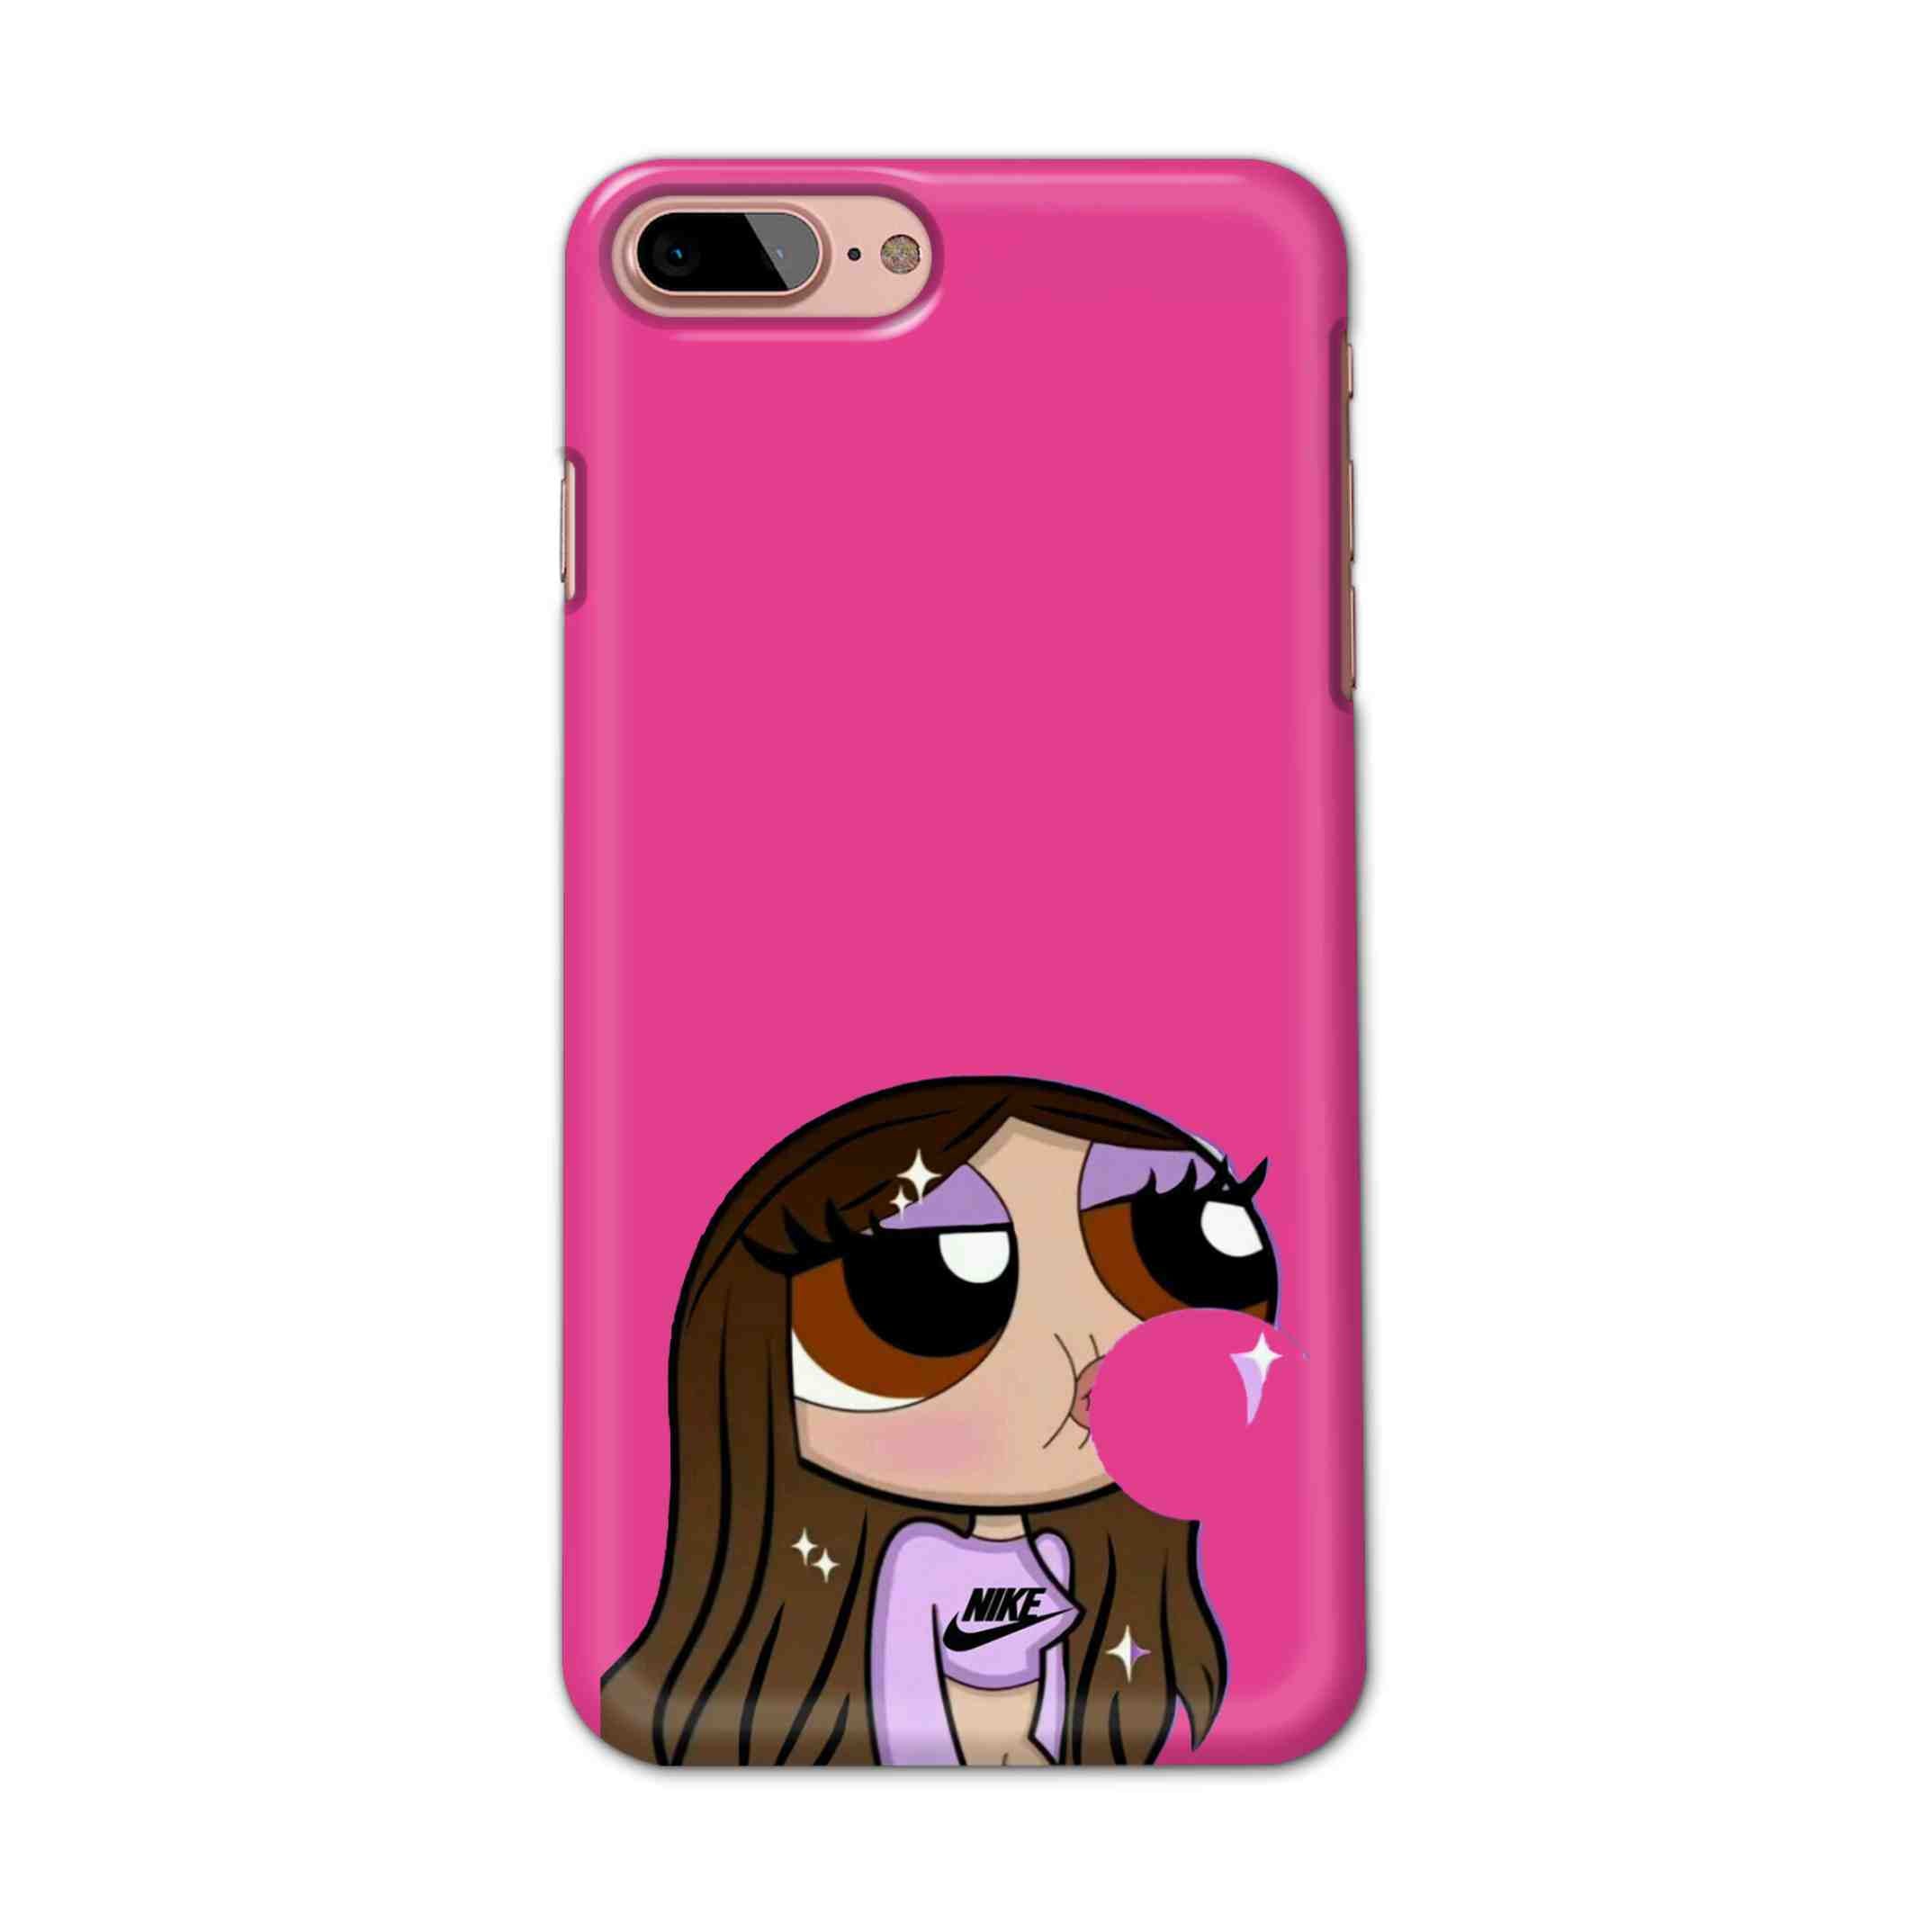 Buy Bubble Girl Hard Back Mobile Phone Case/Cover For iPhone 7 Plus / 8 Plus Online